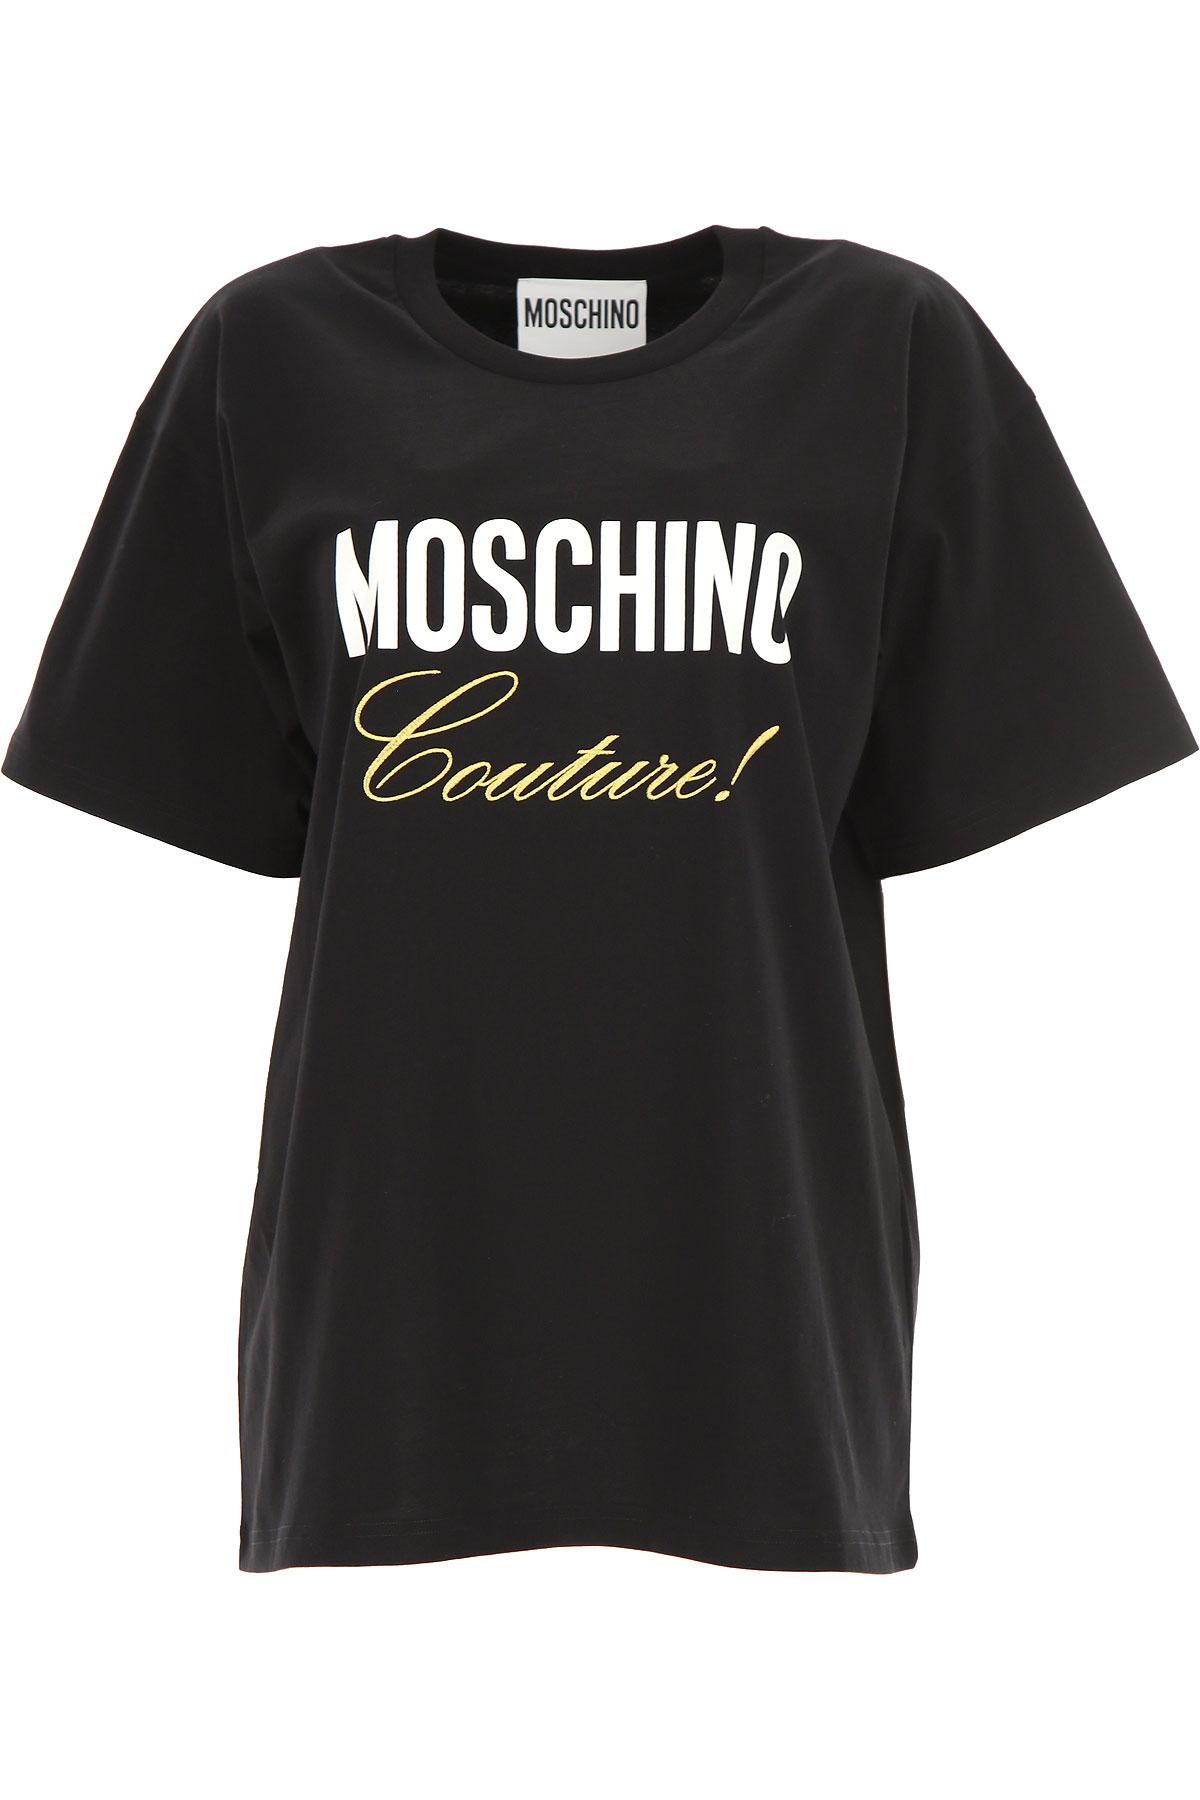 Moschino Cotton T-shirt For Women On Sale in Black - Lyst